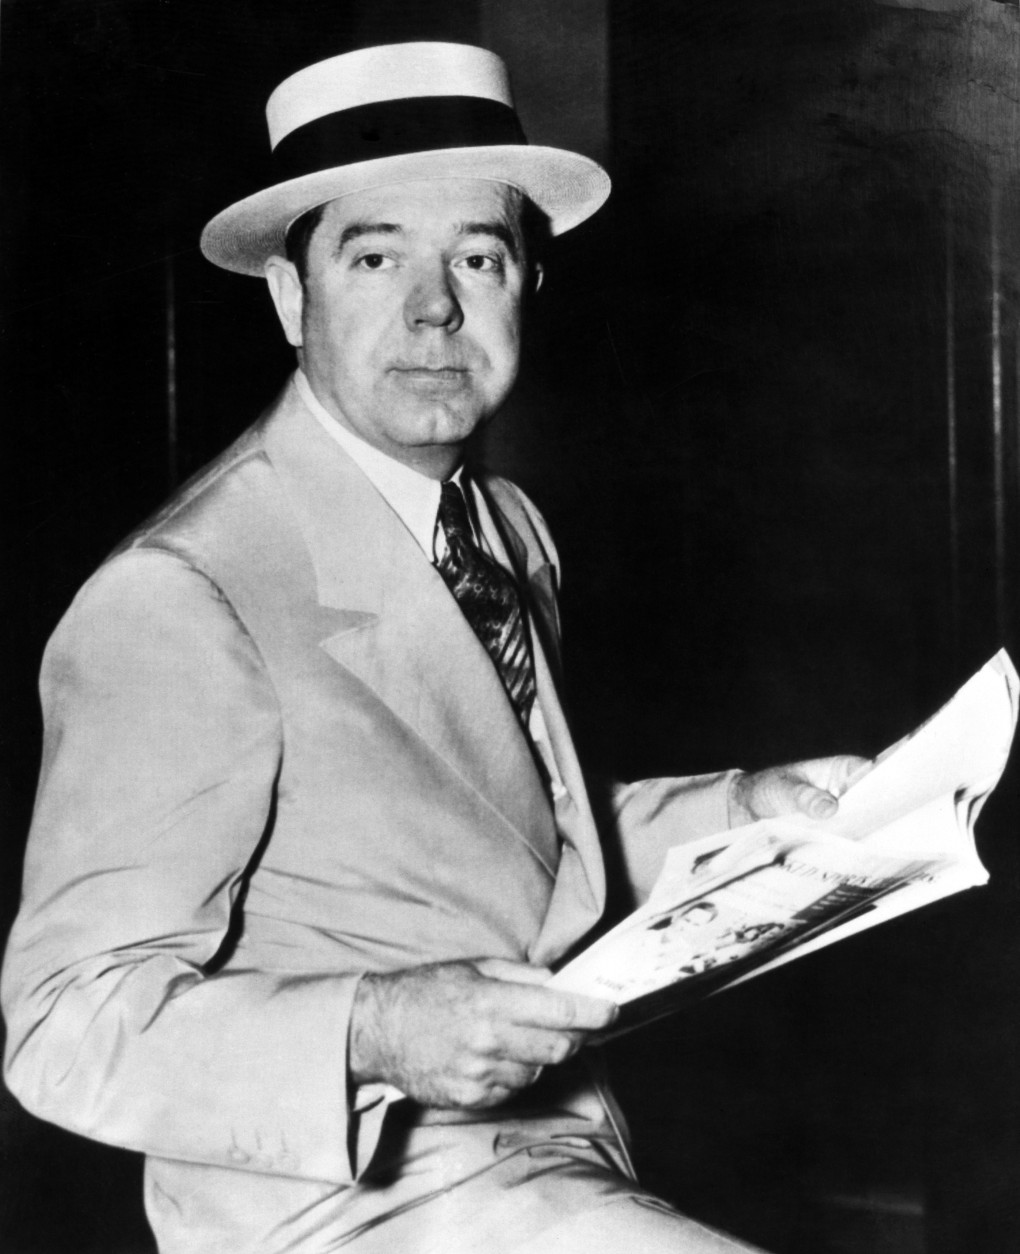 On Sept. 8, 1935, Sen. Huey P. Long, D-La., was shot and mortally wounded inside the Louisiana State Capitol; he died two days later. (AP Photo)